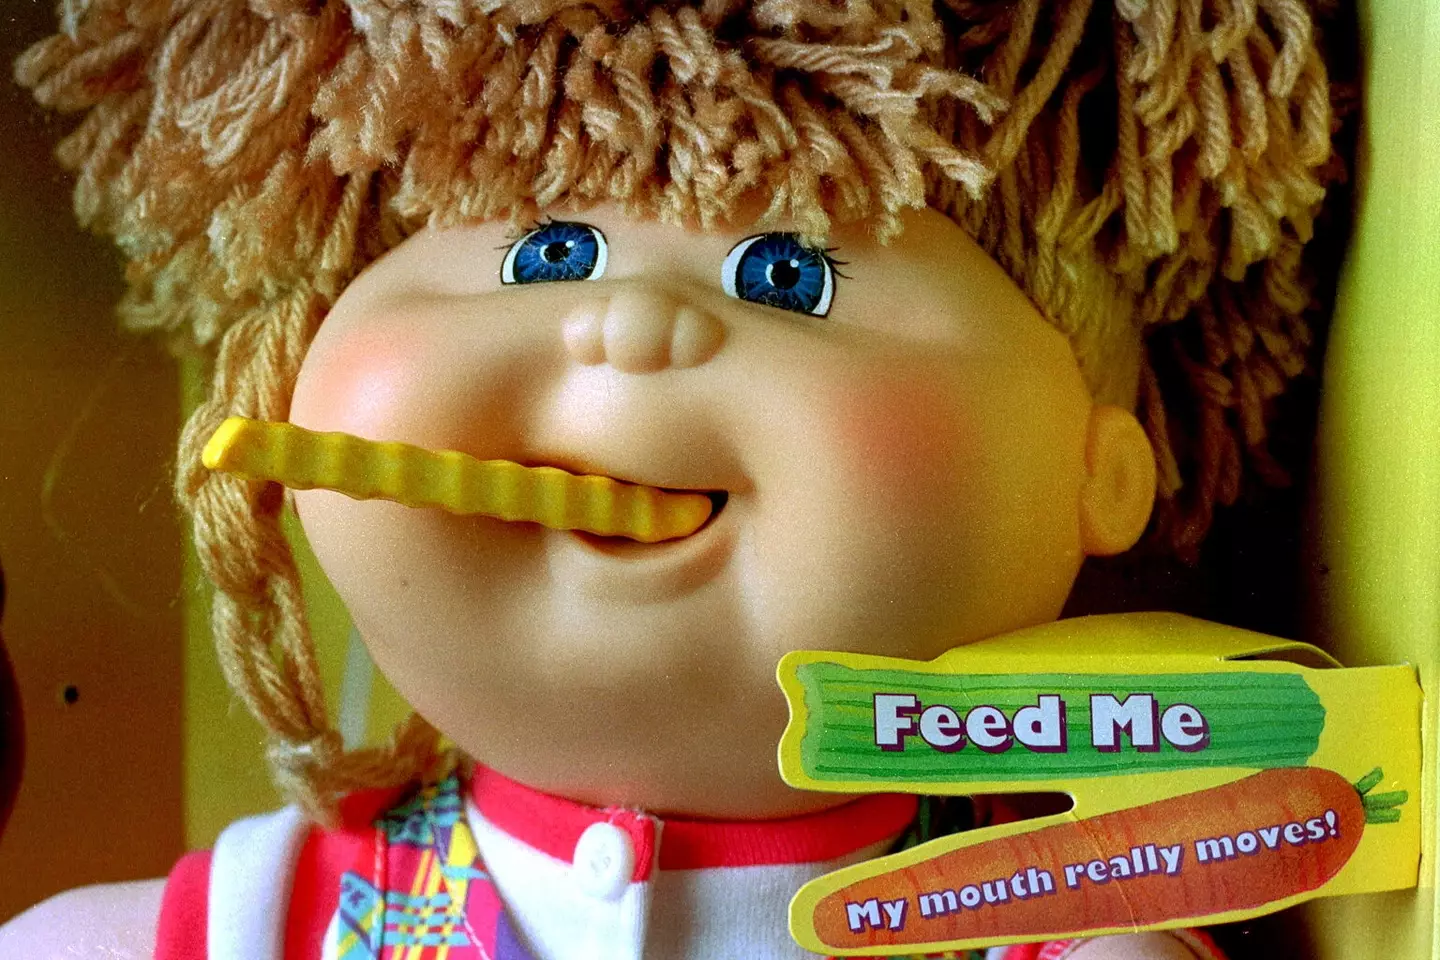 Cabbage Patch Kids changed the world of retail forever.